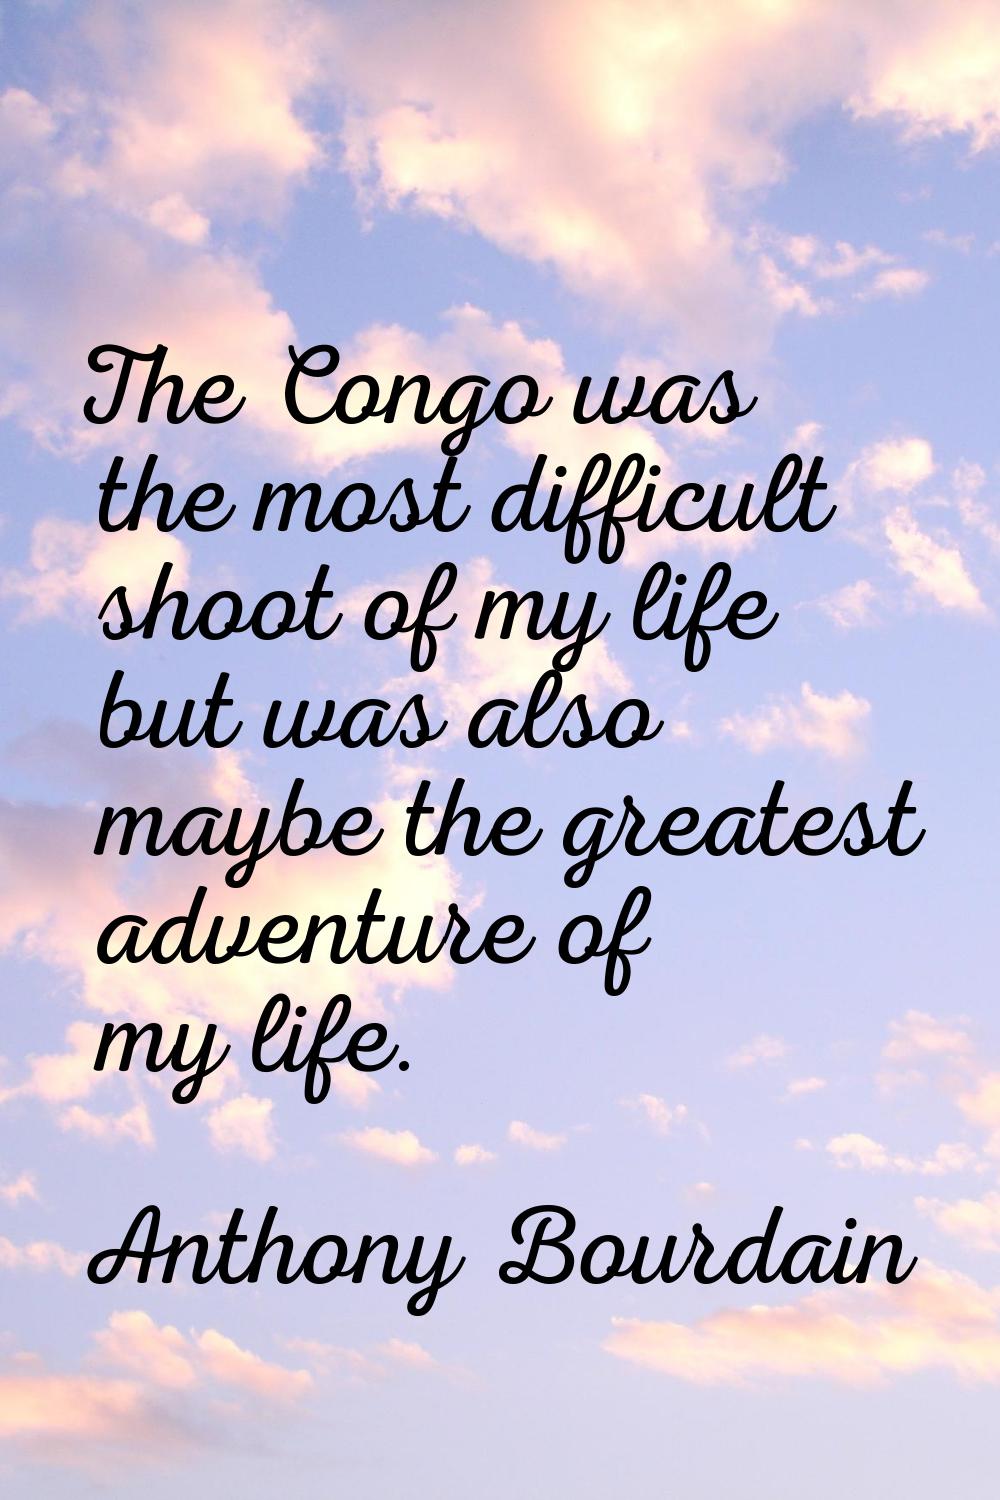 The Congo was the most difficult shoot of my life but was also maybe the greatest adventure of my l